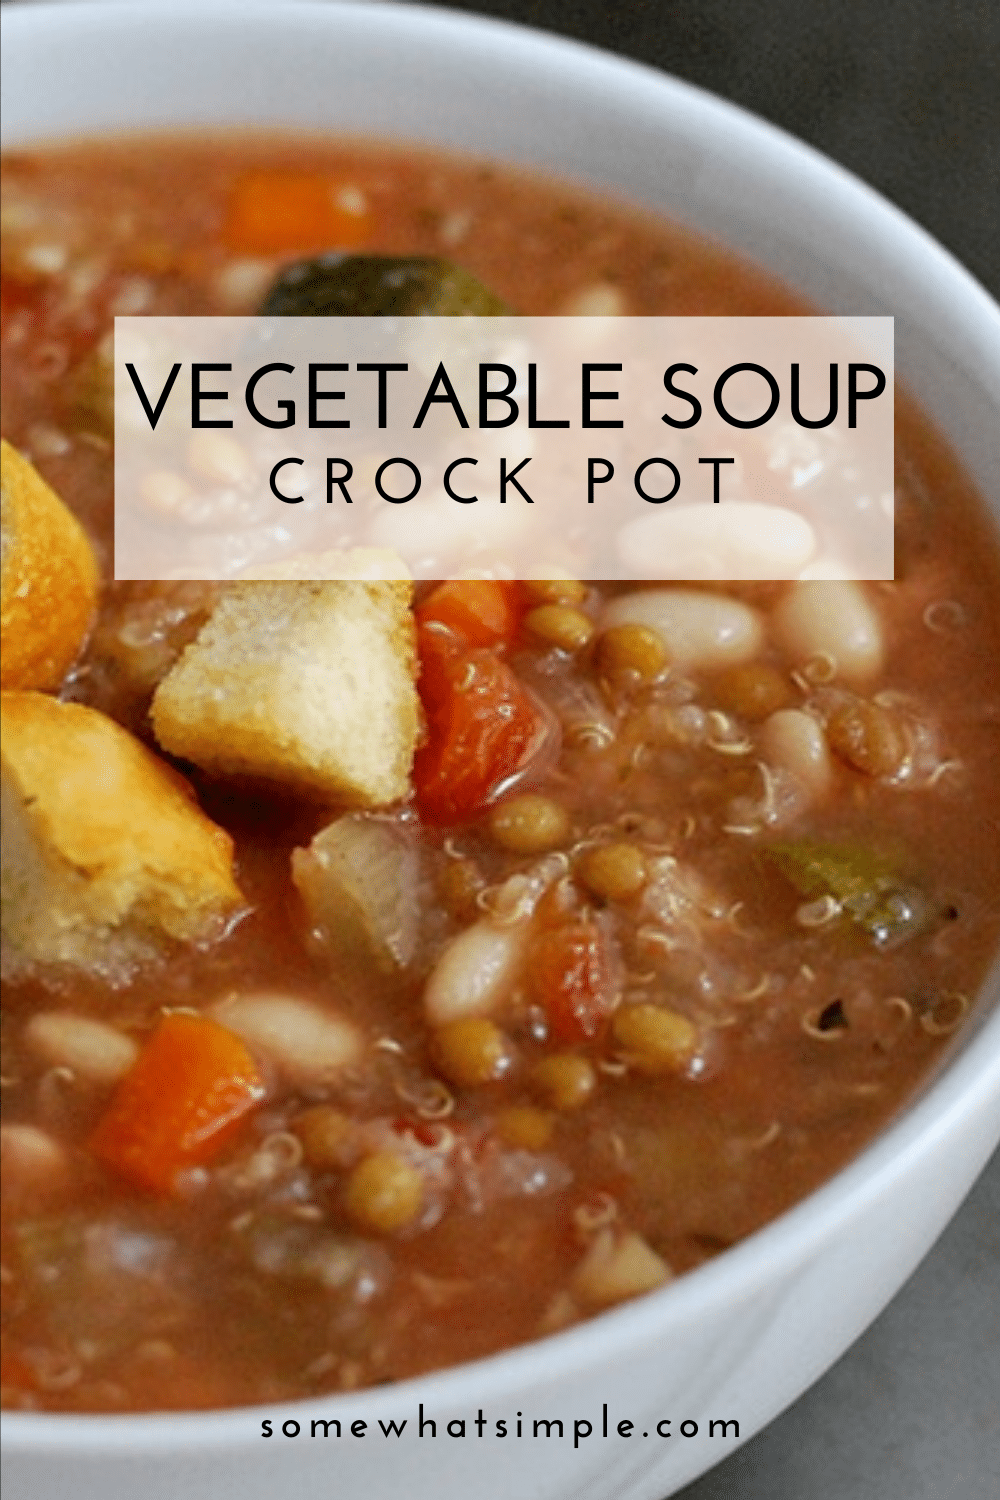 Crock pot vegetable soup is a hearty recipe that's incredibly easy to make. Loaded with your favorite vegetables, it's both healthy and delicious! Just place all of the ingredients in the slow cooker and you're all set. via @somewhatsimple